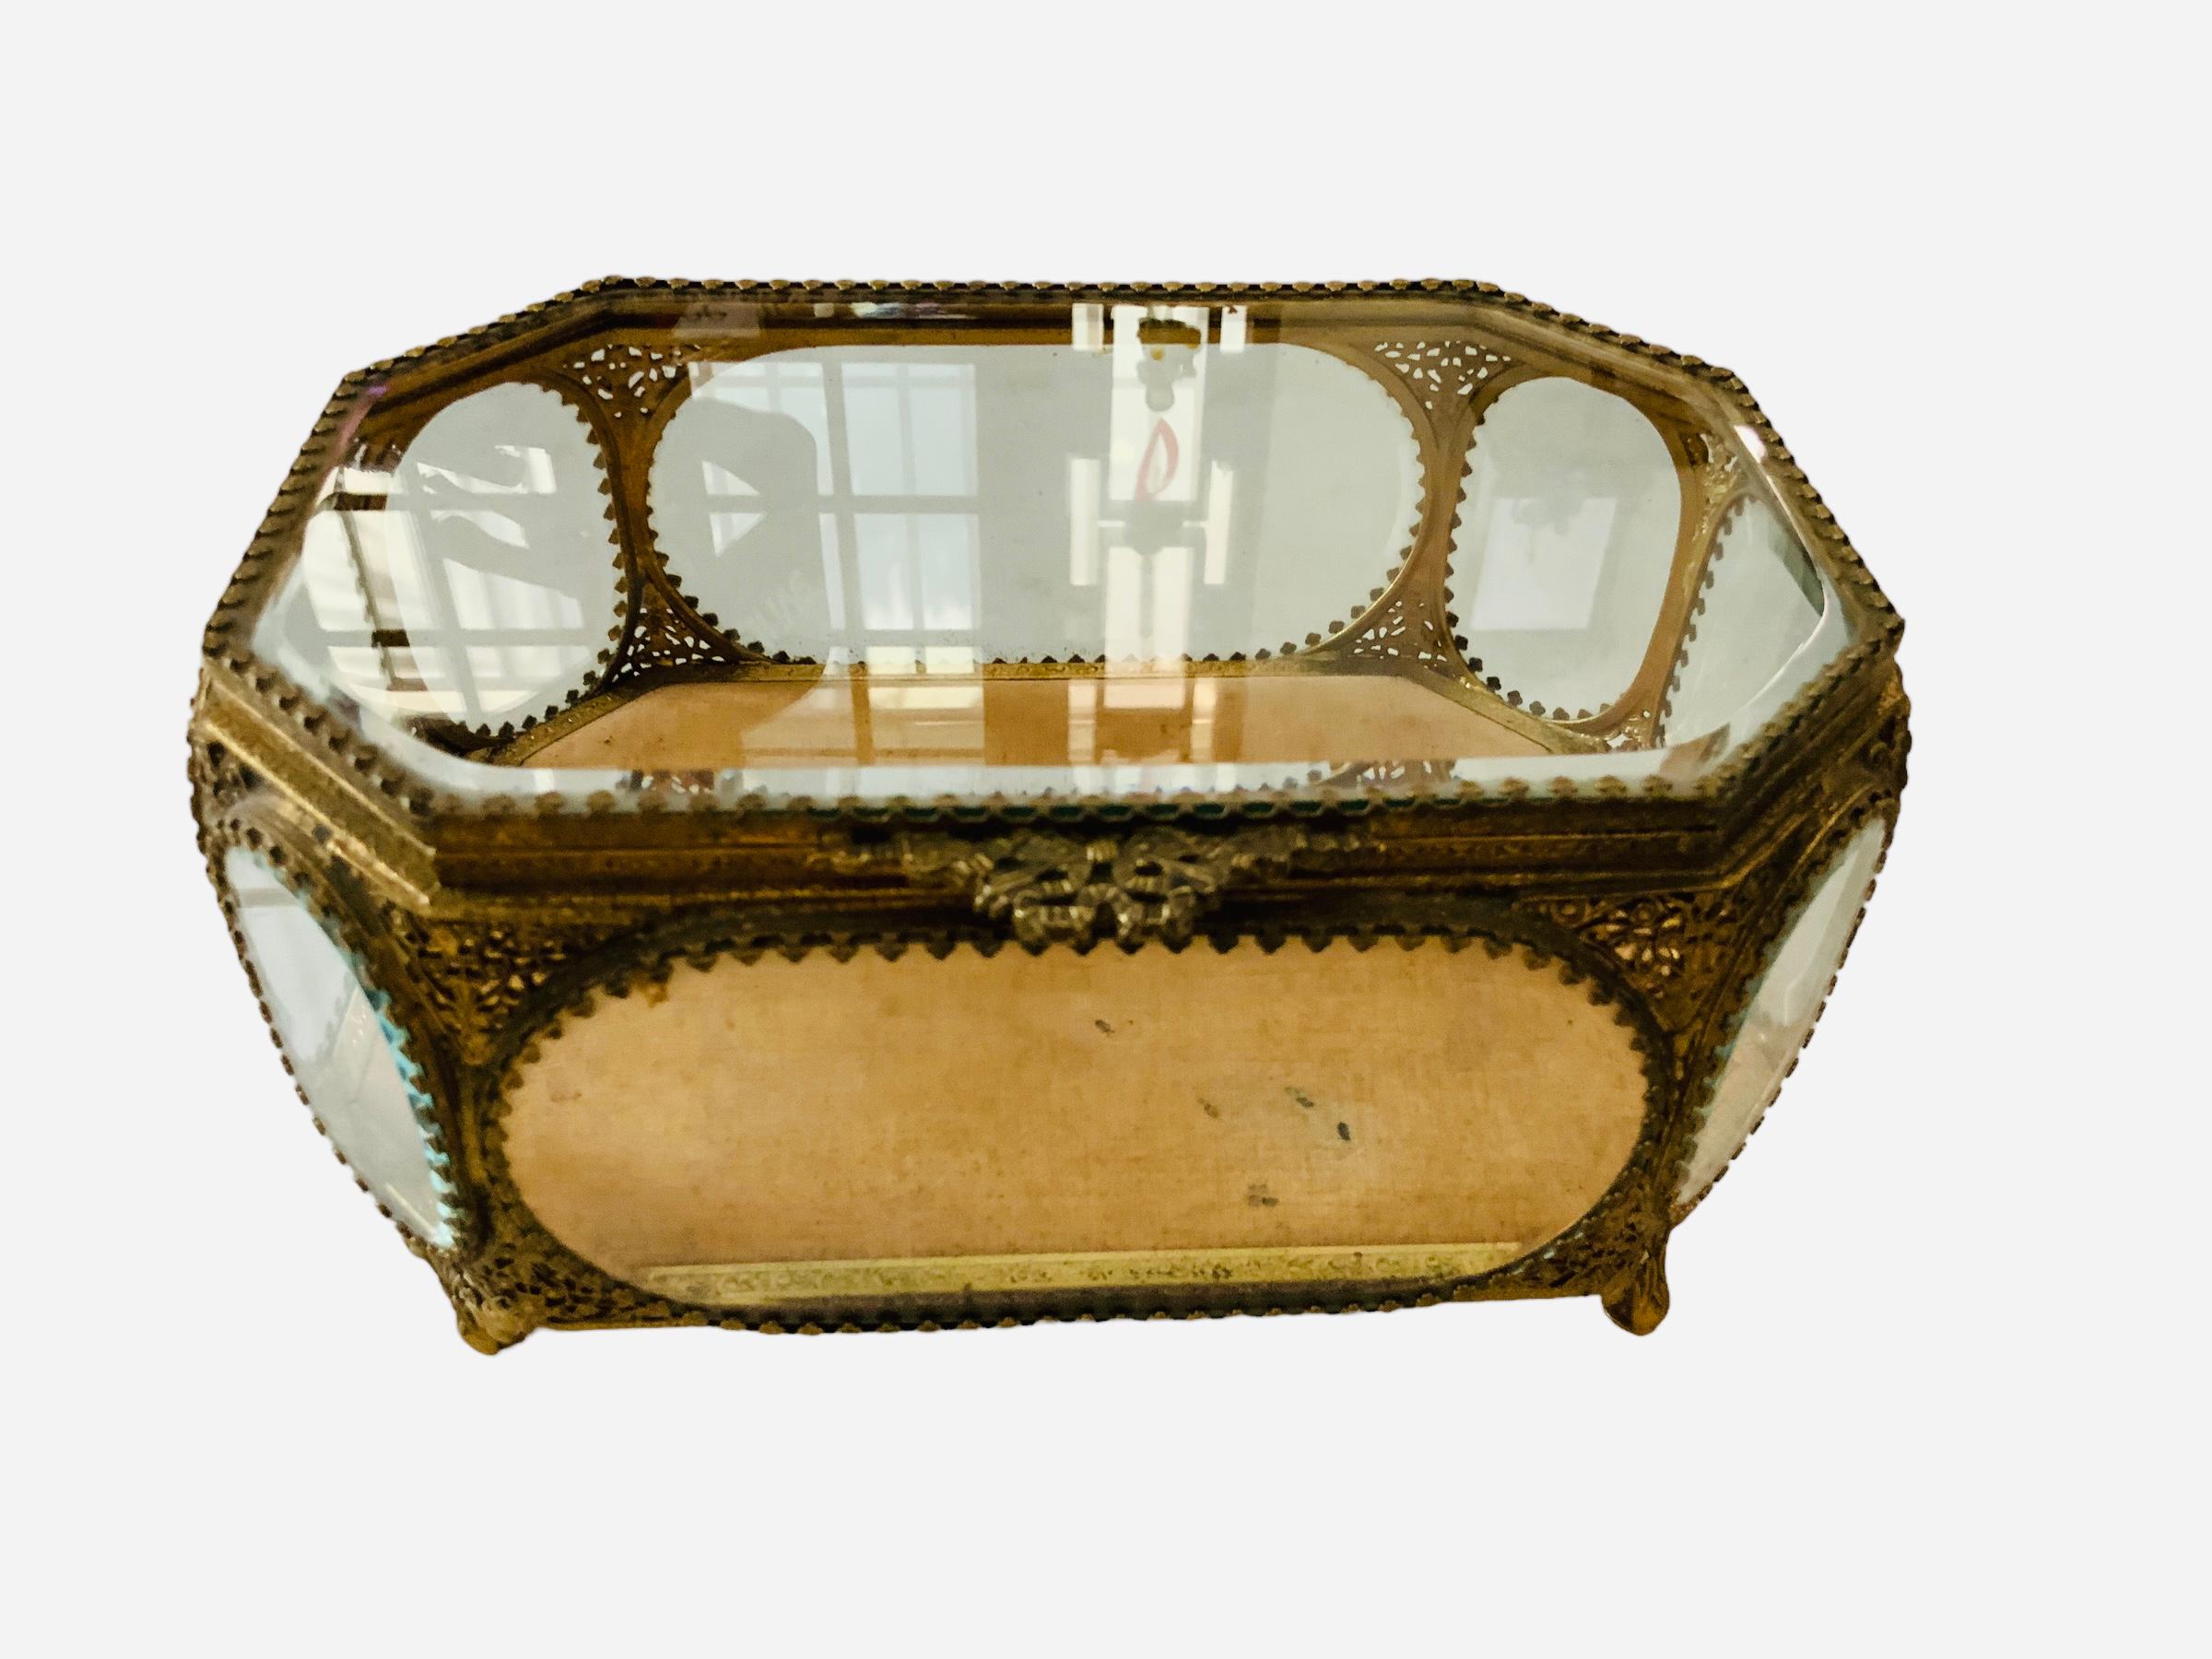 This is a large gilt metal octagonal shaped casket/jewelry box. Their beveled glass is framed with a gilt garland of tiny shamrocks and their corners are decorated with a filigree pattern of scrolls, leaves and hearts. The inside floor wood panel of